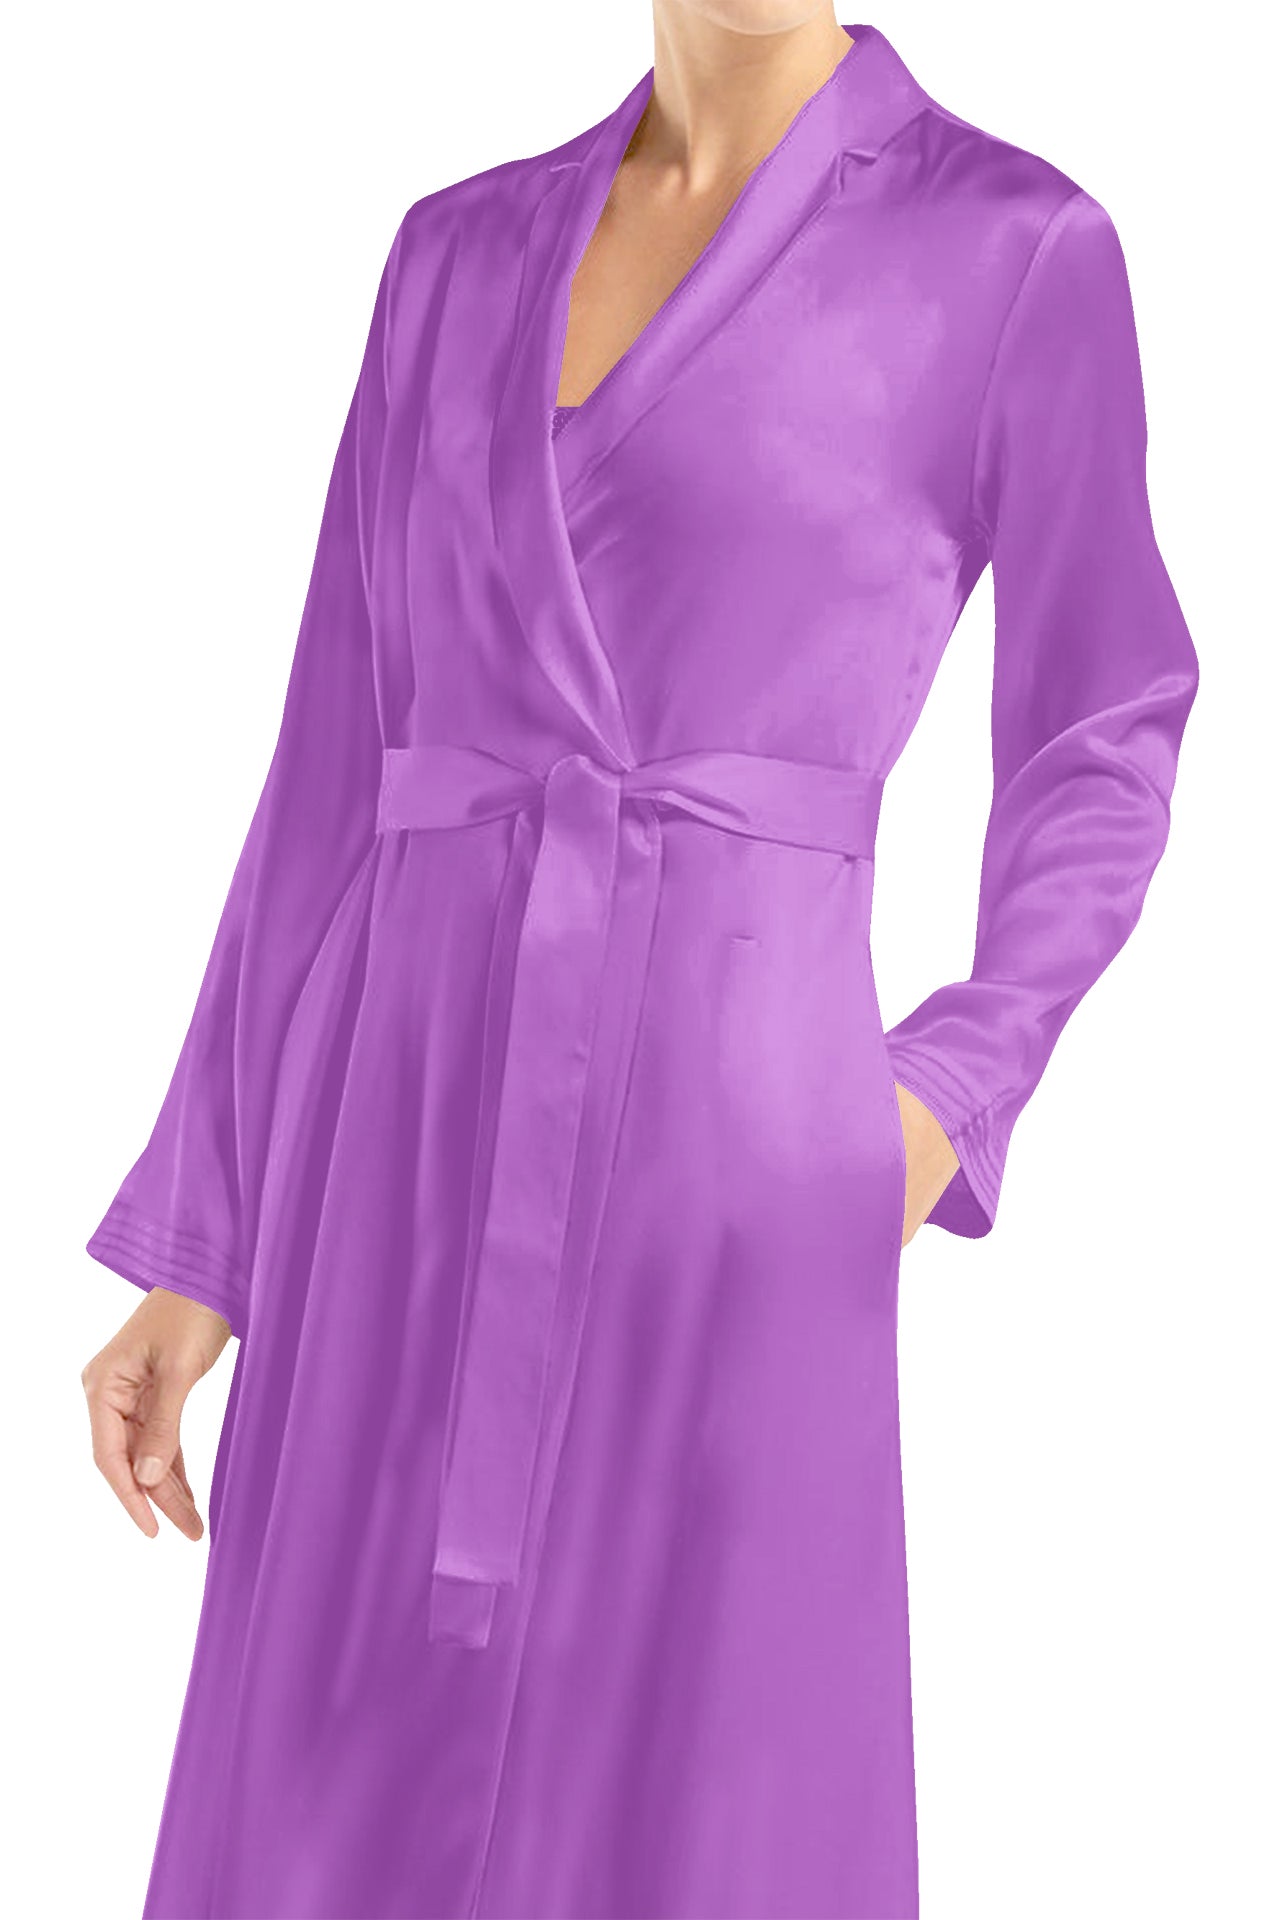 Midi Length Wrap Dress Made with Vegan Silk in African Violet